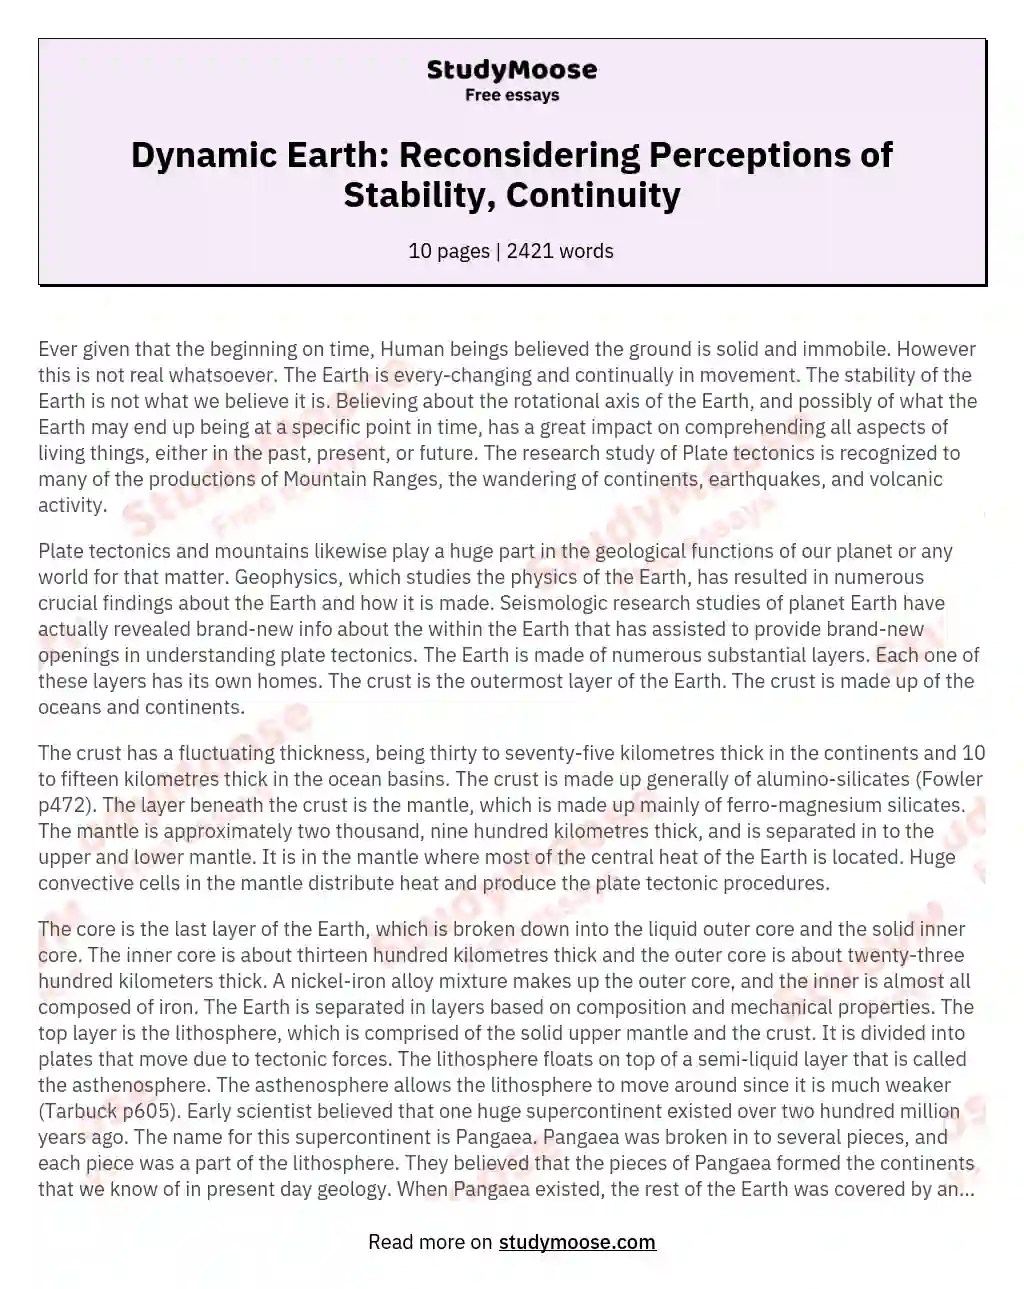 Dynamic Earth: Reconsidering Perceptions of Stability, Continuity essay